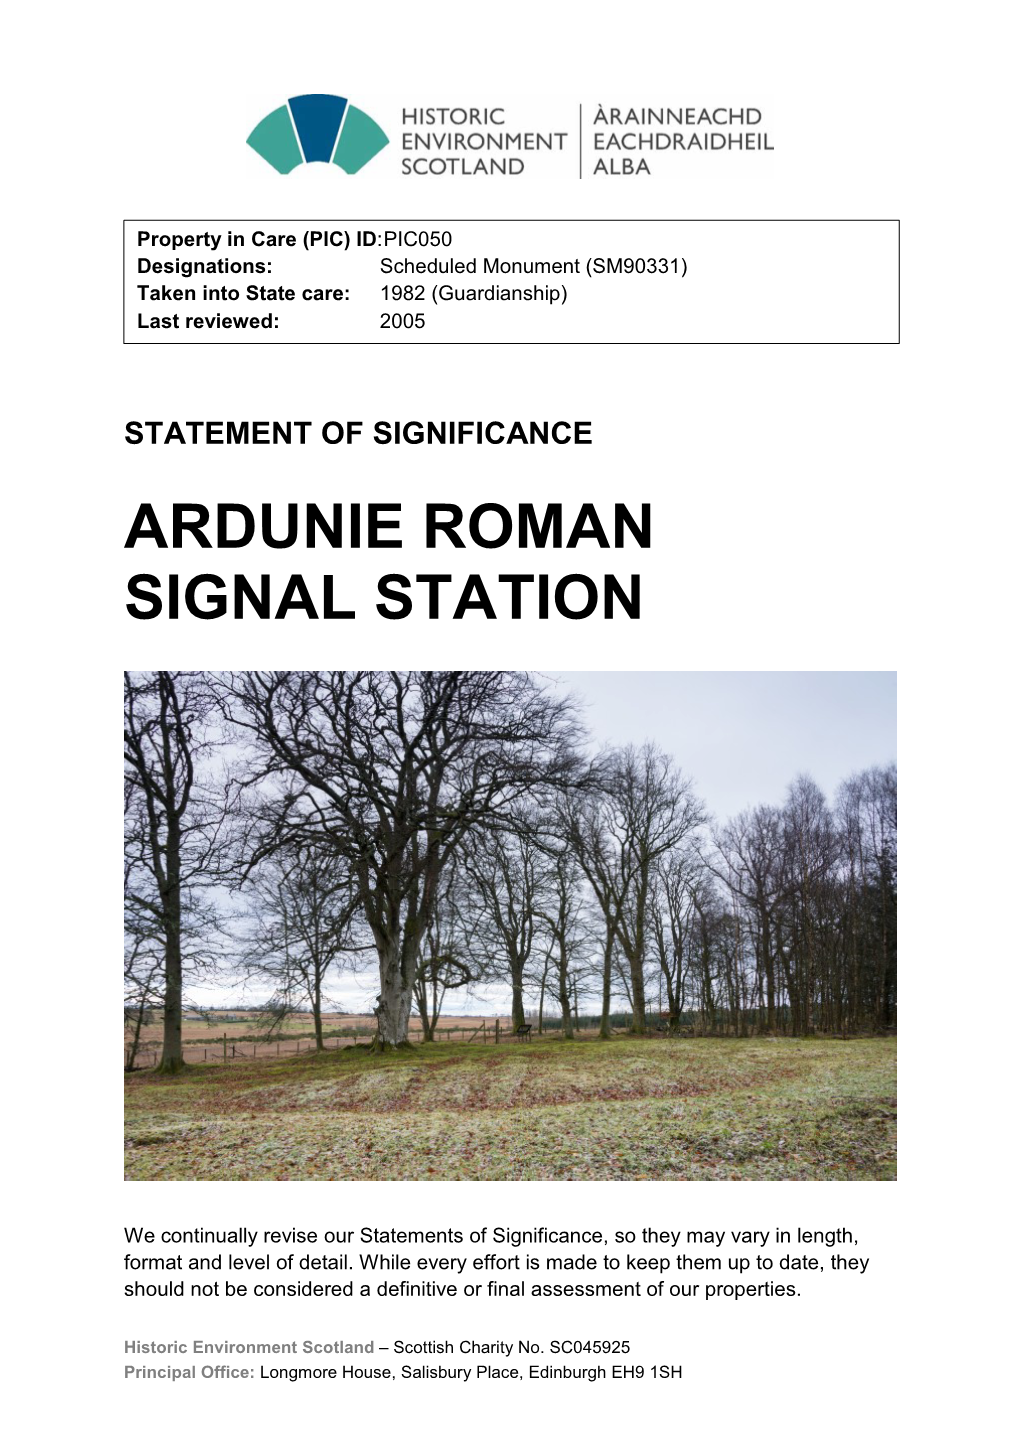 Ardunie Roman Signal Station Statement of Significance